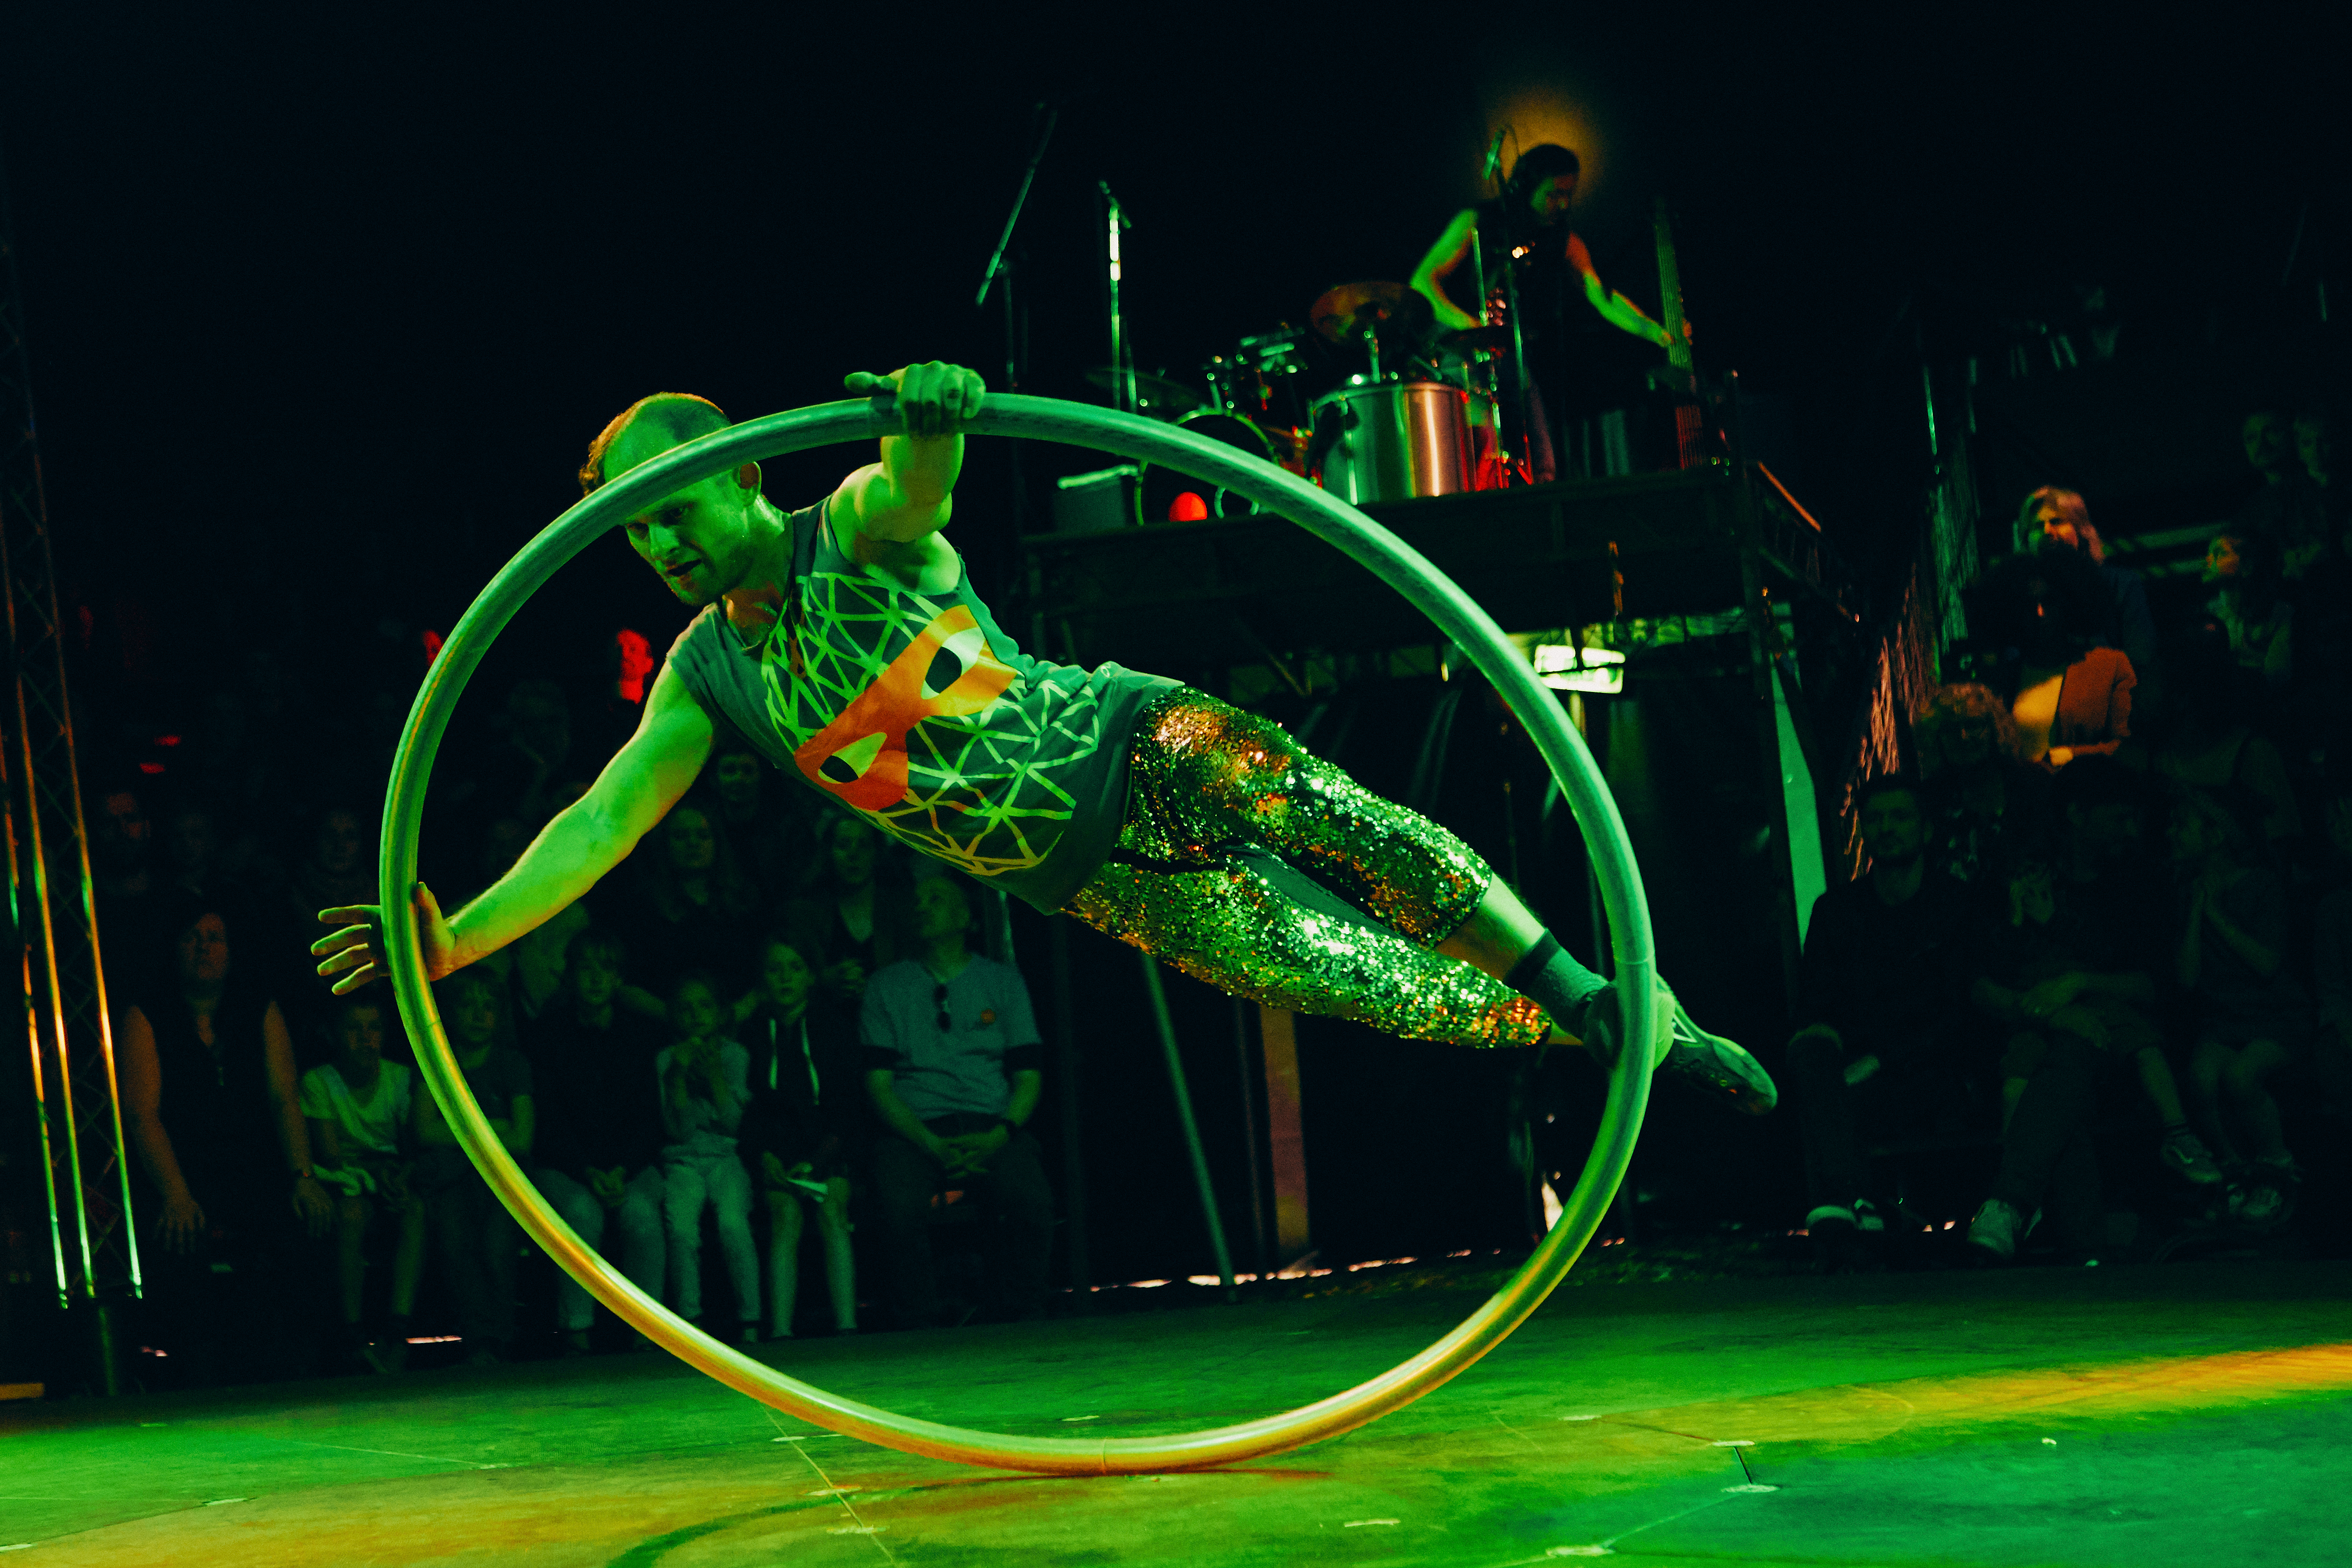 High resolution photo of an acrobat in a wheel